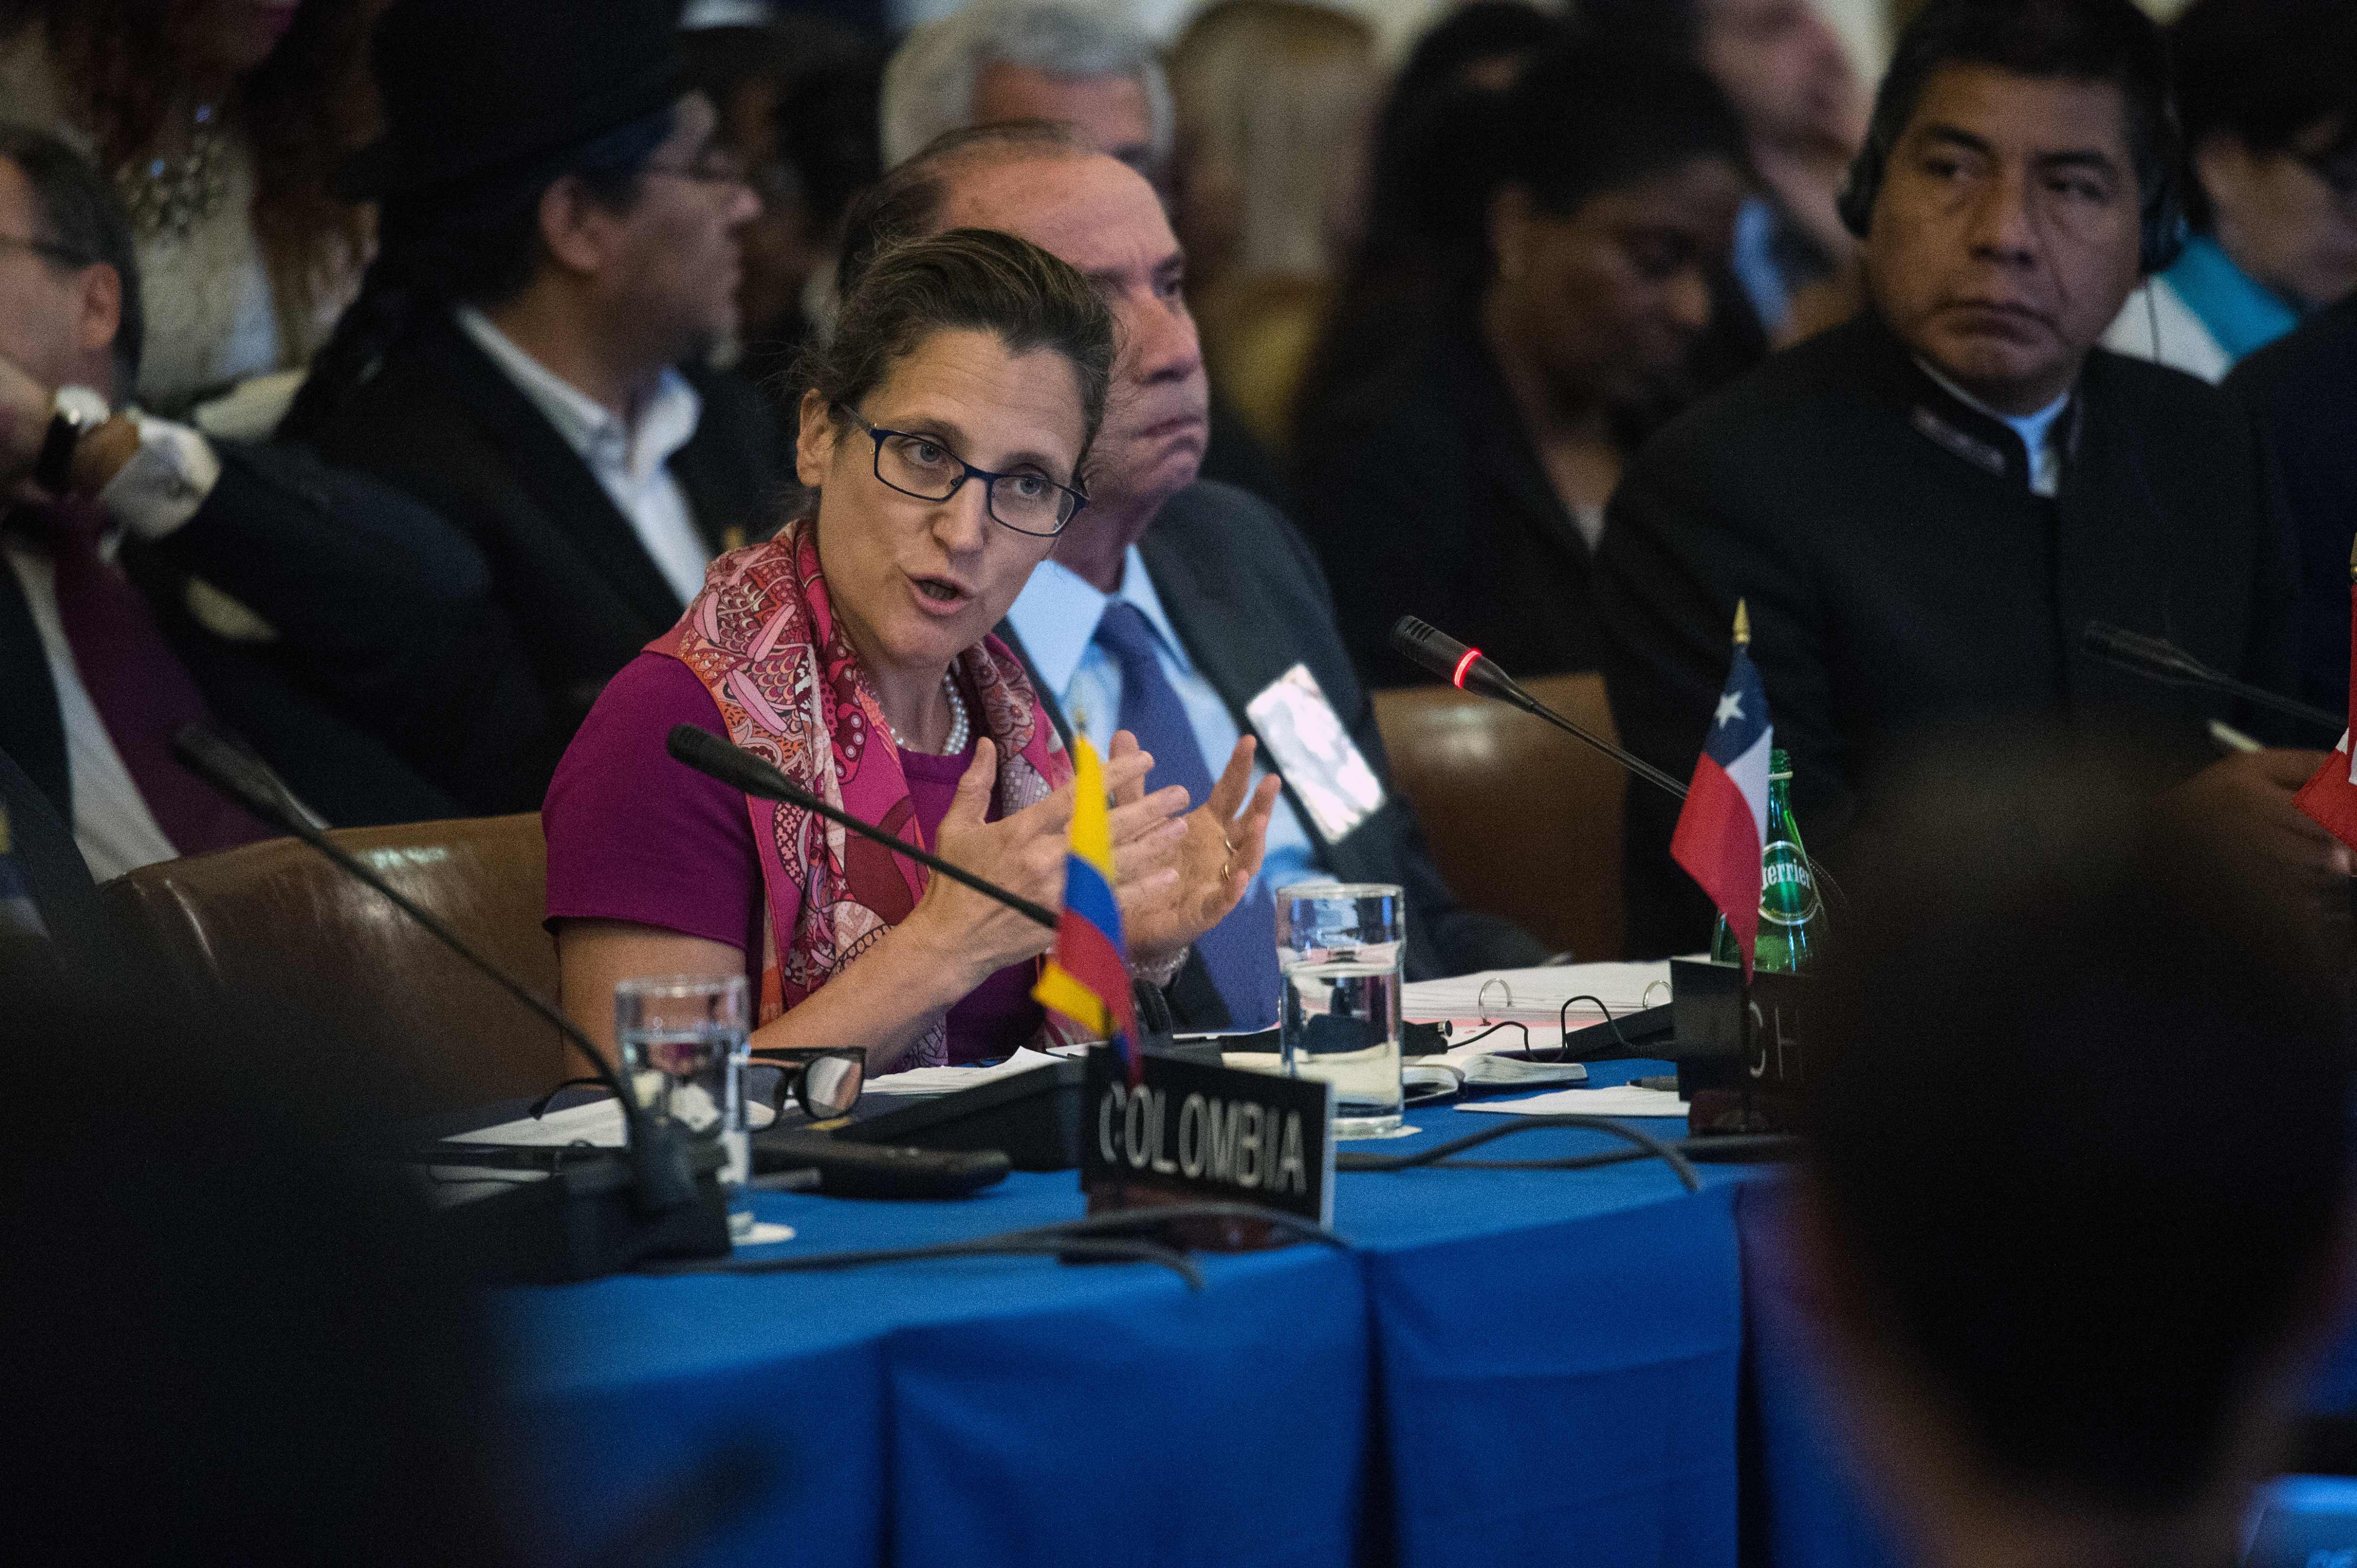 Canadian Foreign Minister Chrystia Freeland addresses an OAS foreign ministers meeting on Venezuelaa in Washington, DC, on May 31, 2017. / (NICHOLAS KAMM&mdash;AFP/Getty Images)